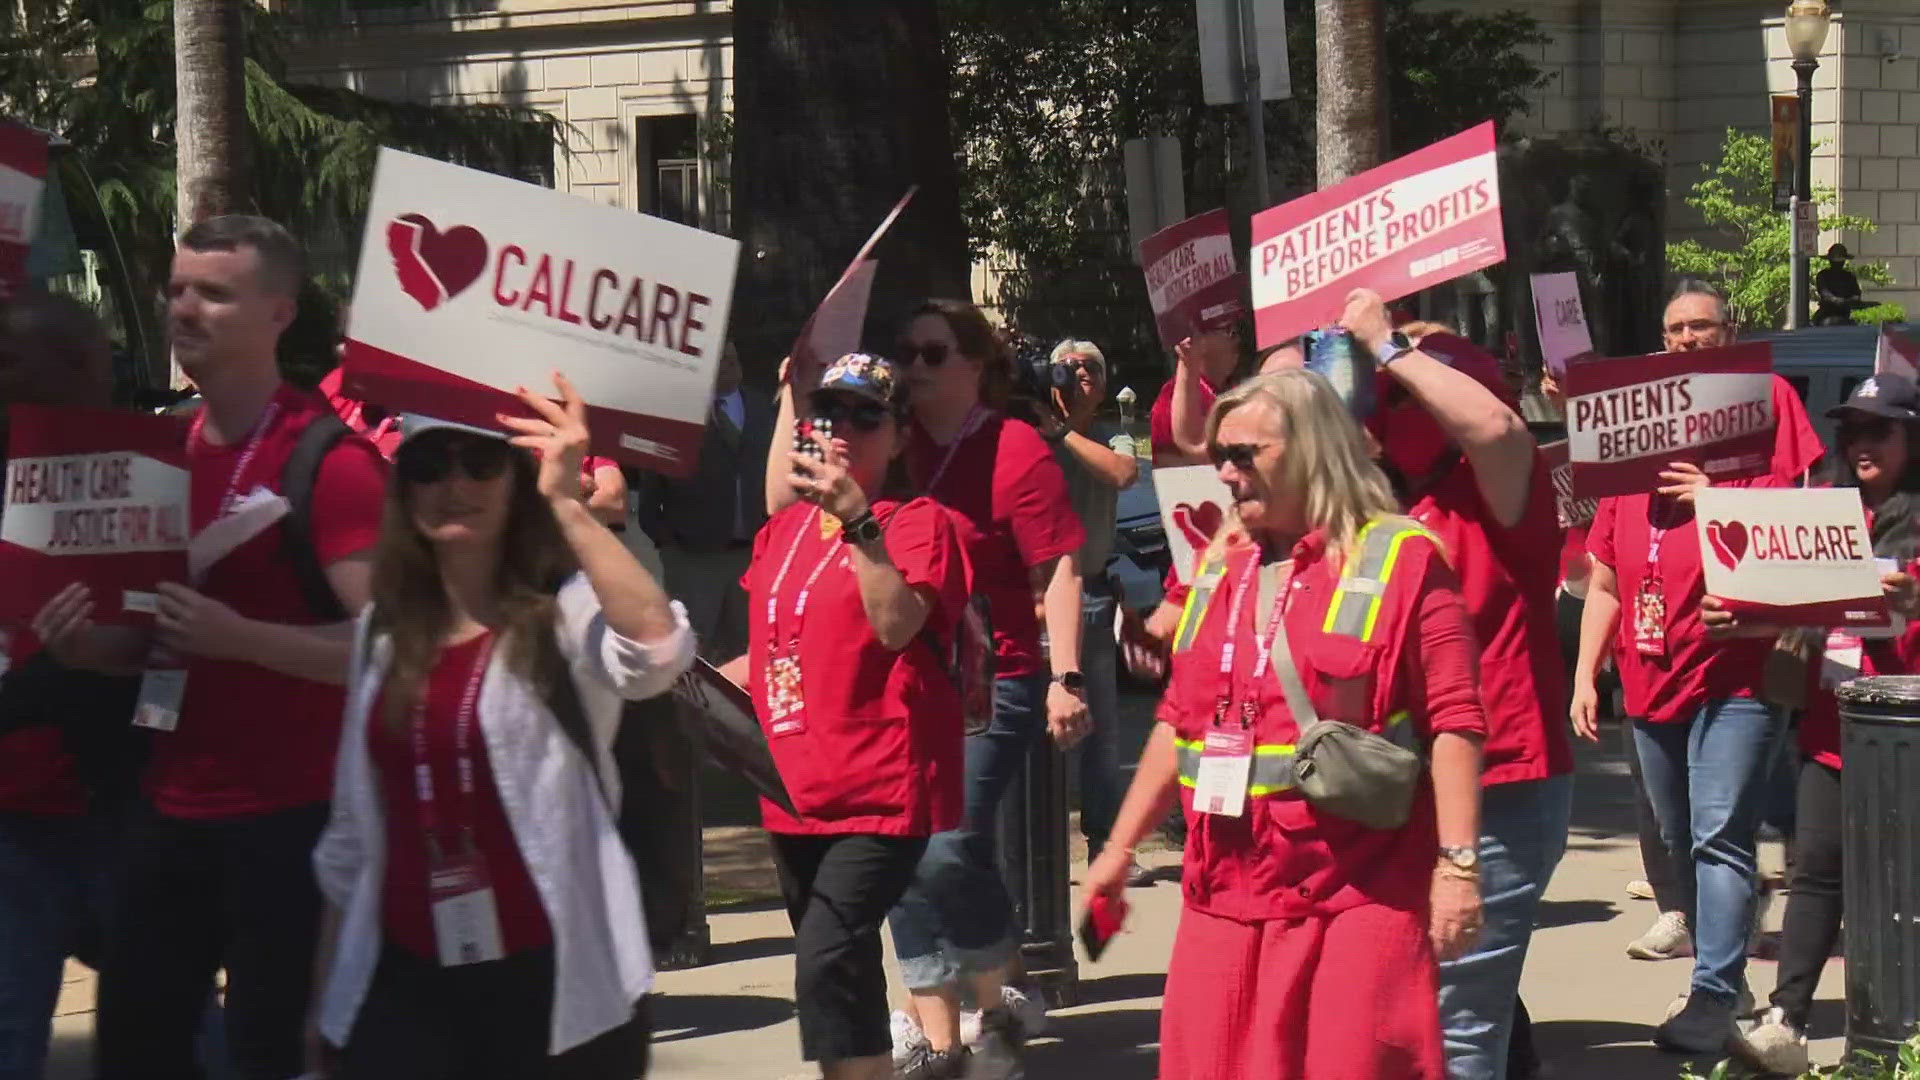 California Nurses Association holds a rally to raise awareness for better patient care